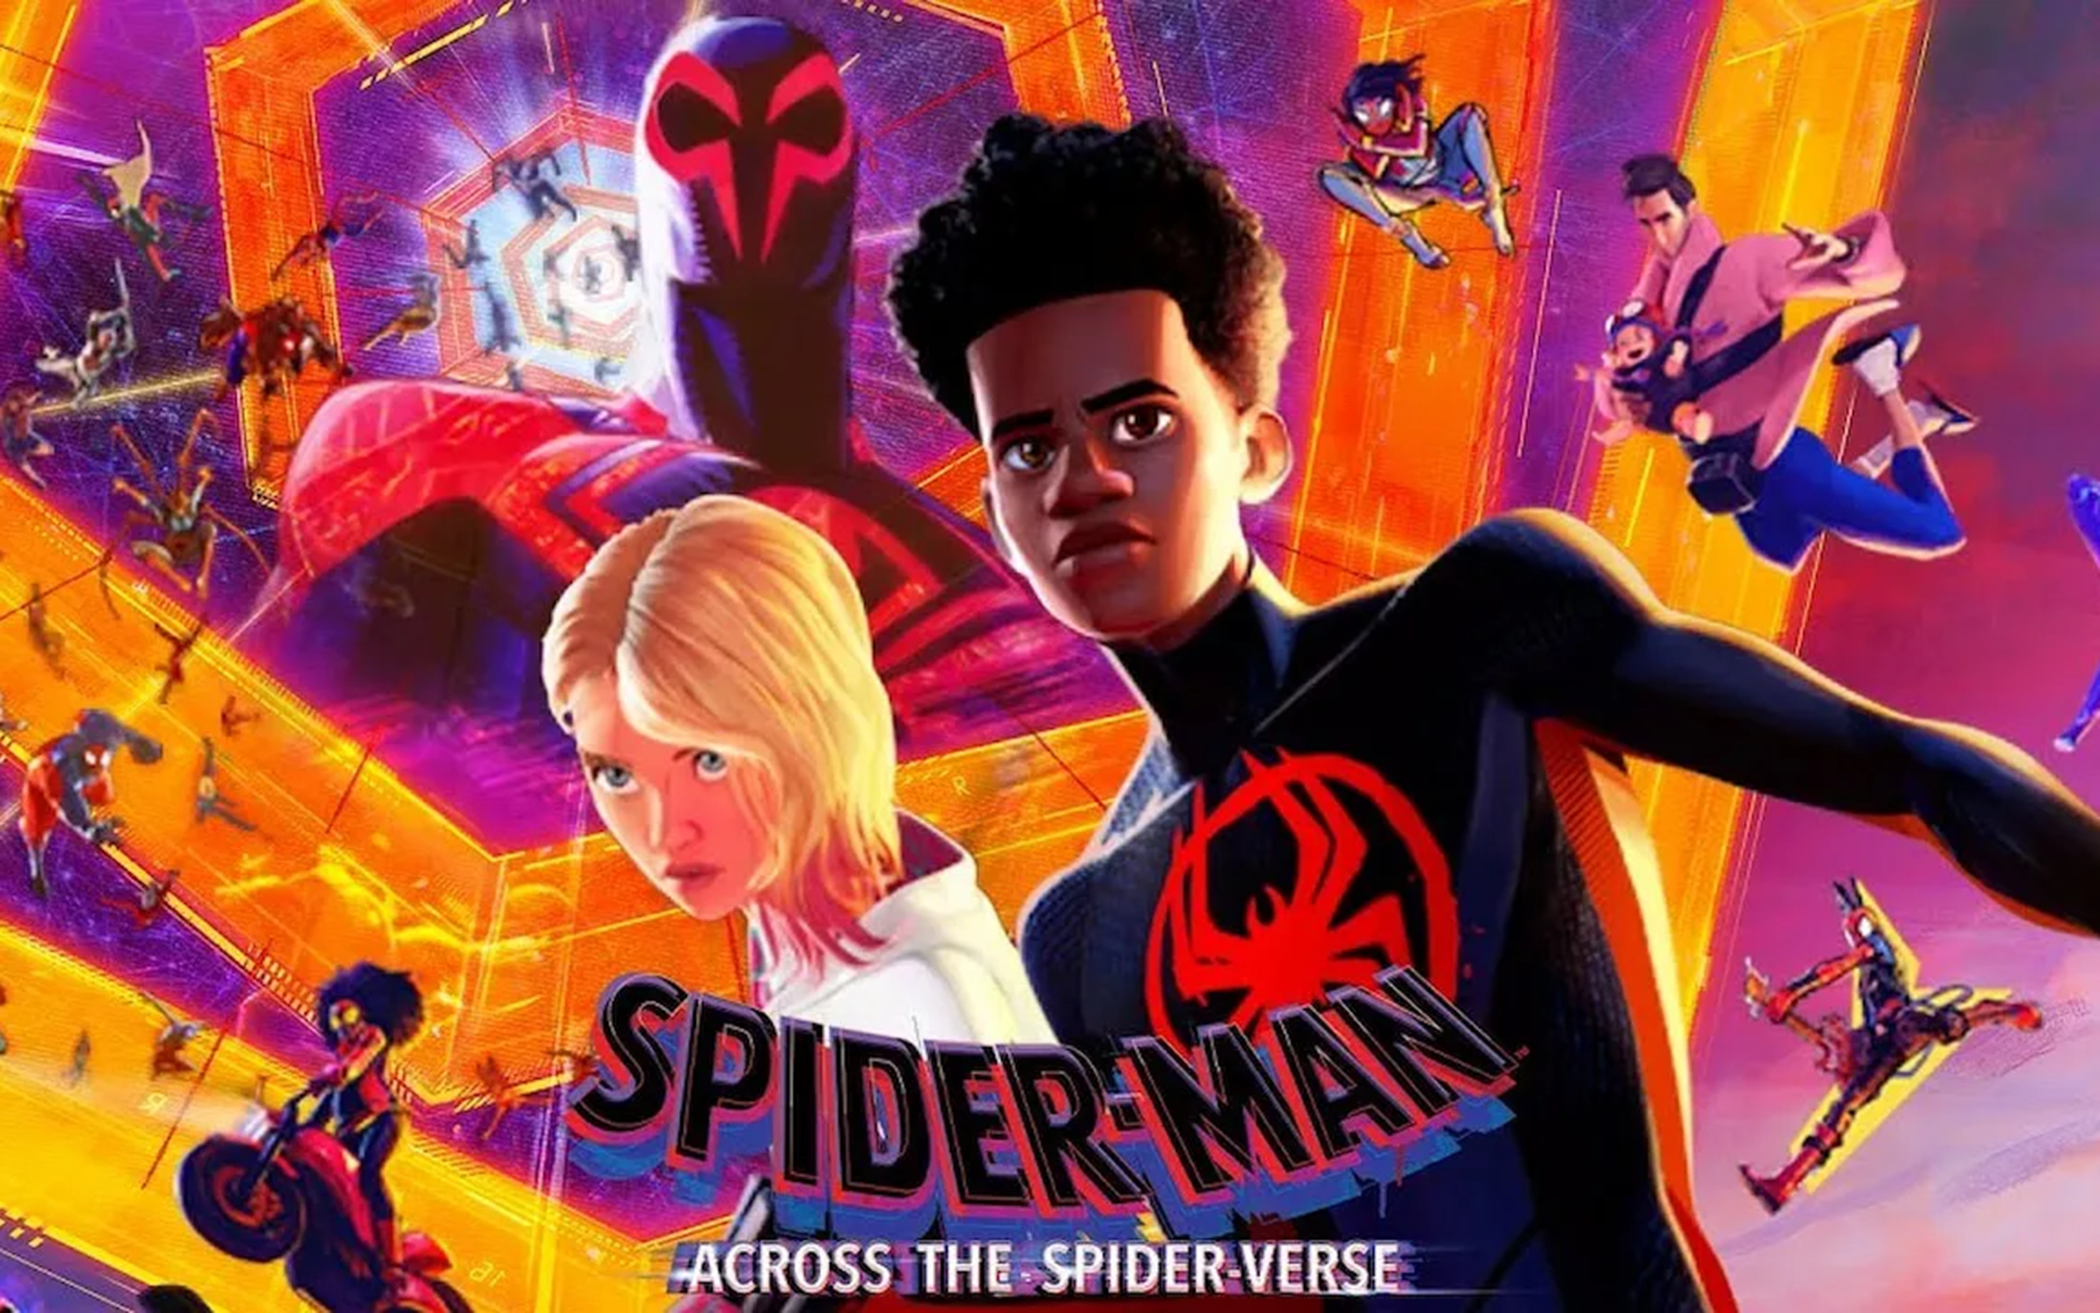 Spider-Man Across the Spider-Verse DS Theatrical Movie Poster